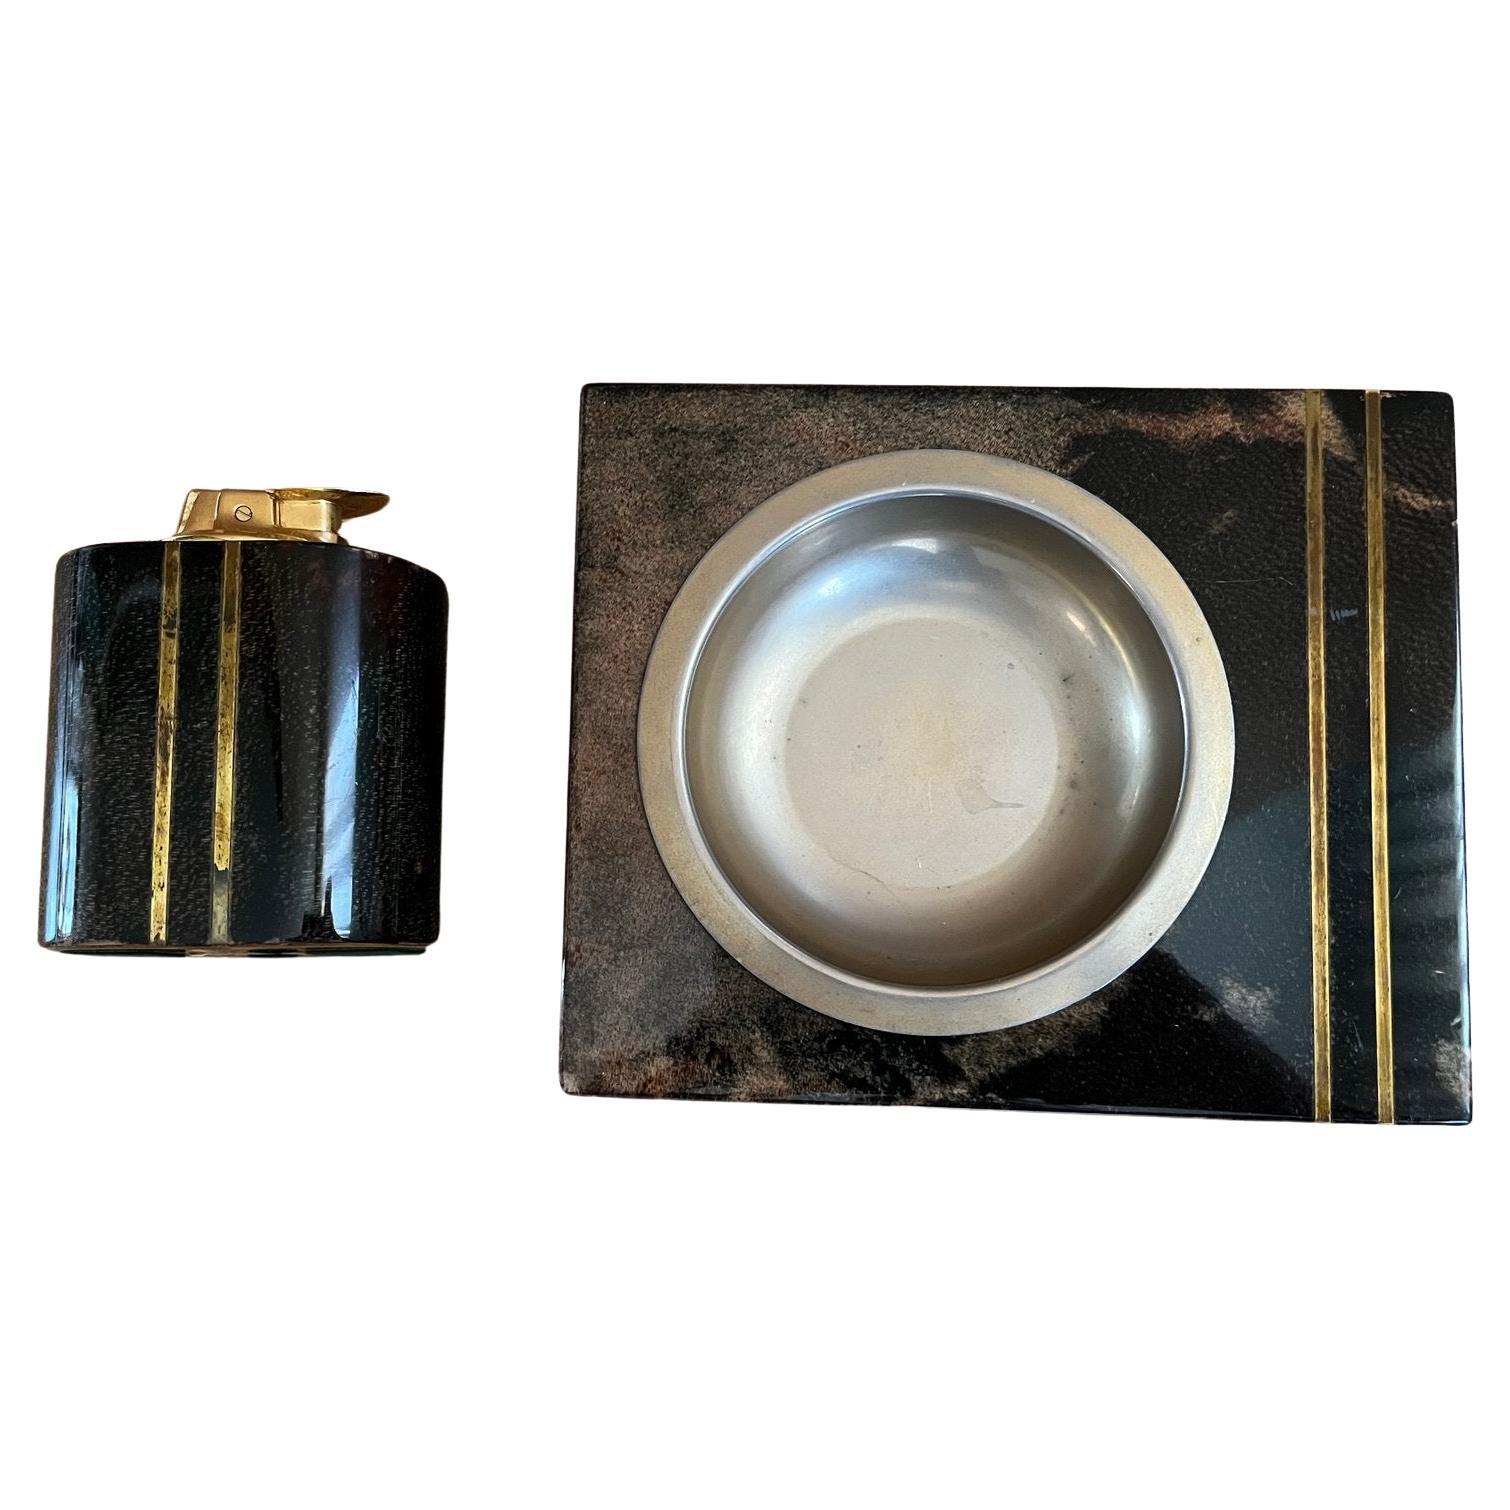 Aldo Tura ashtray and lighter in goatskin veneer with brass elements For Sale